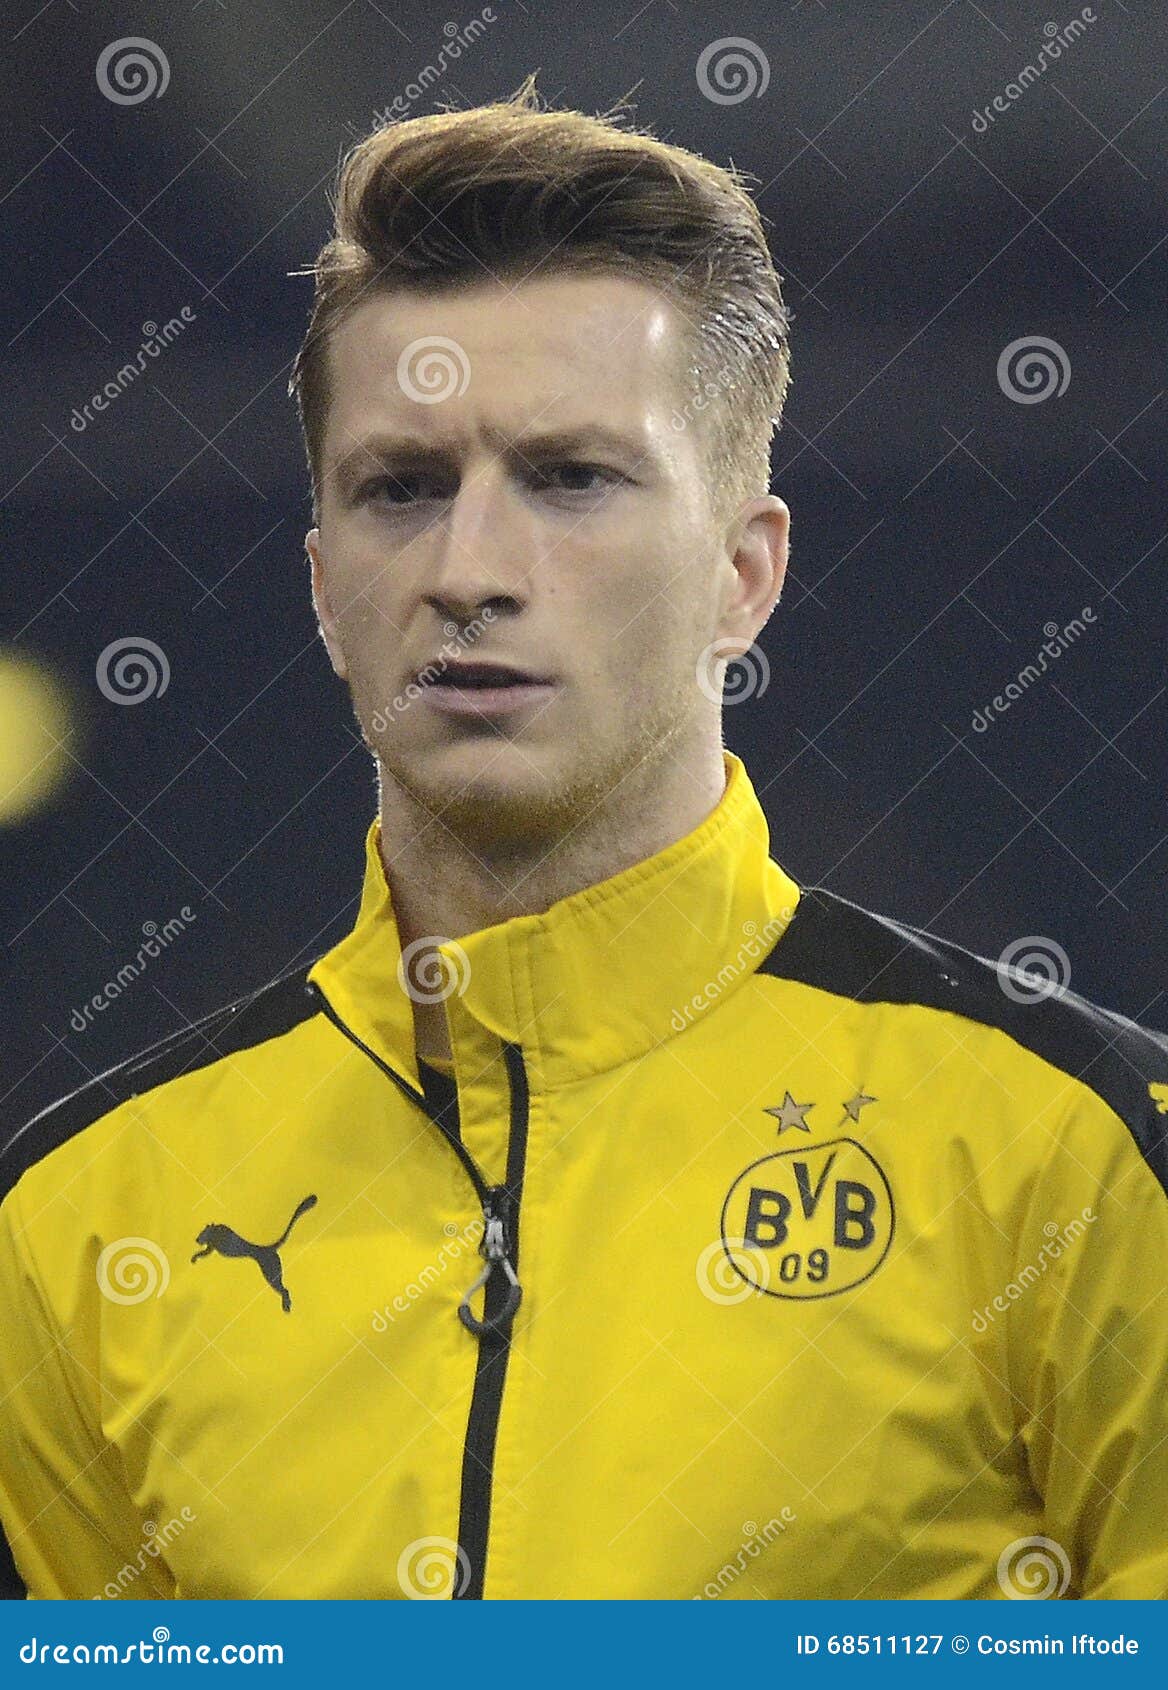 How To Style Your Hair Like Marco Reus - Fresh Men's Football Player Hair  Tutorial - YouTube